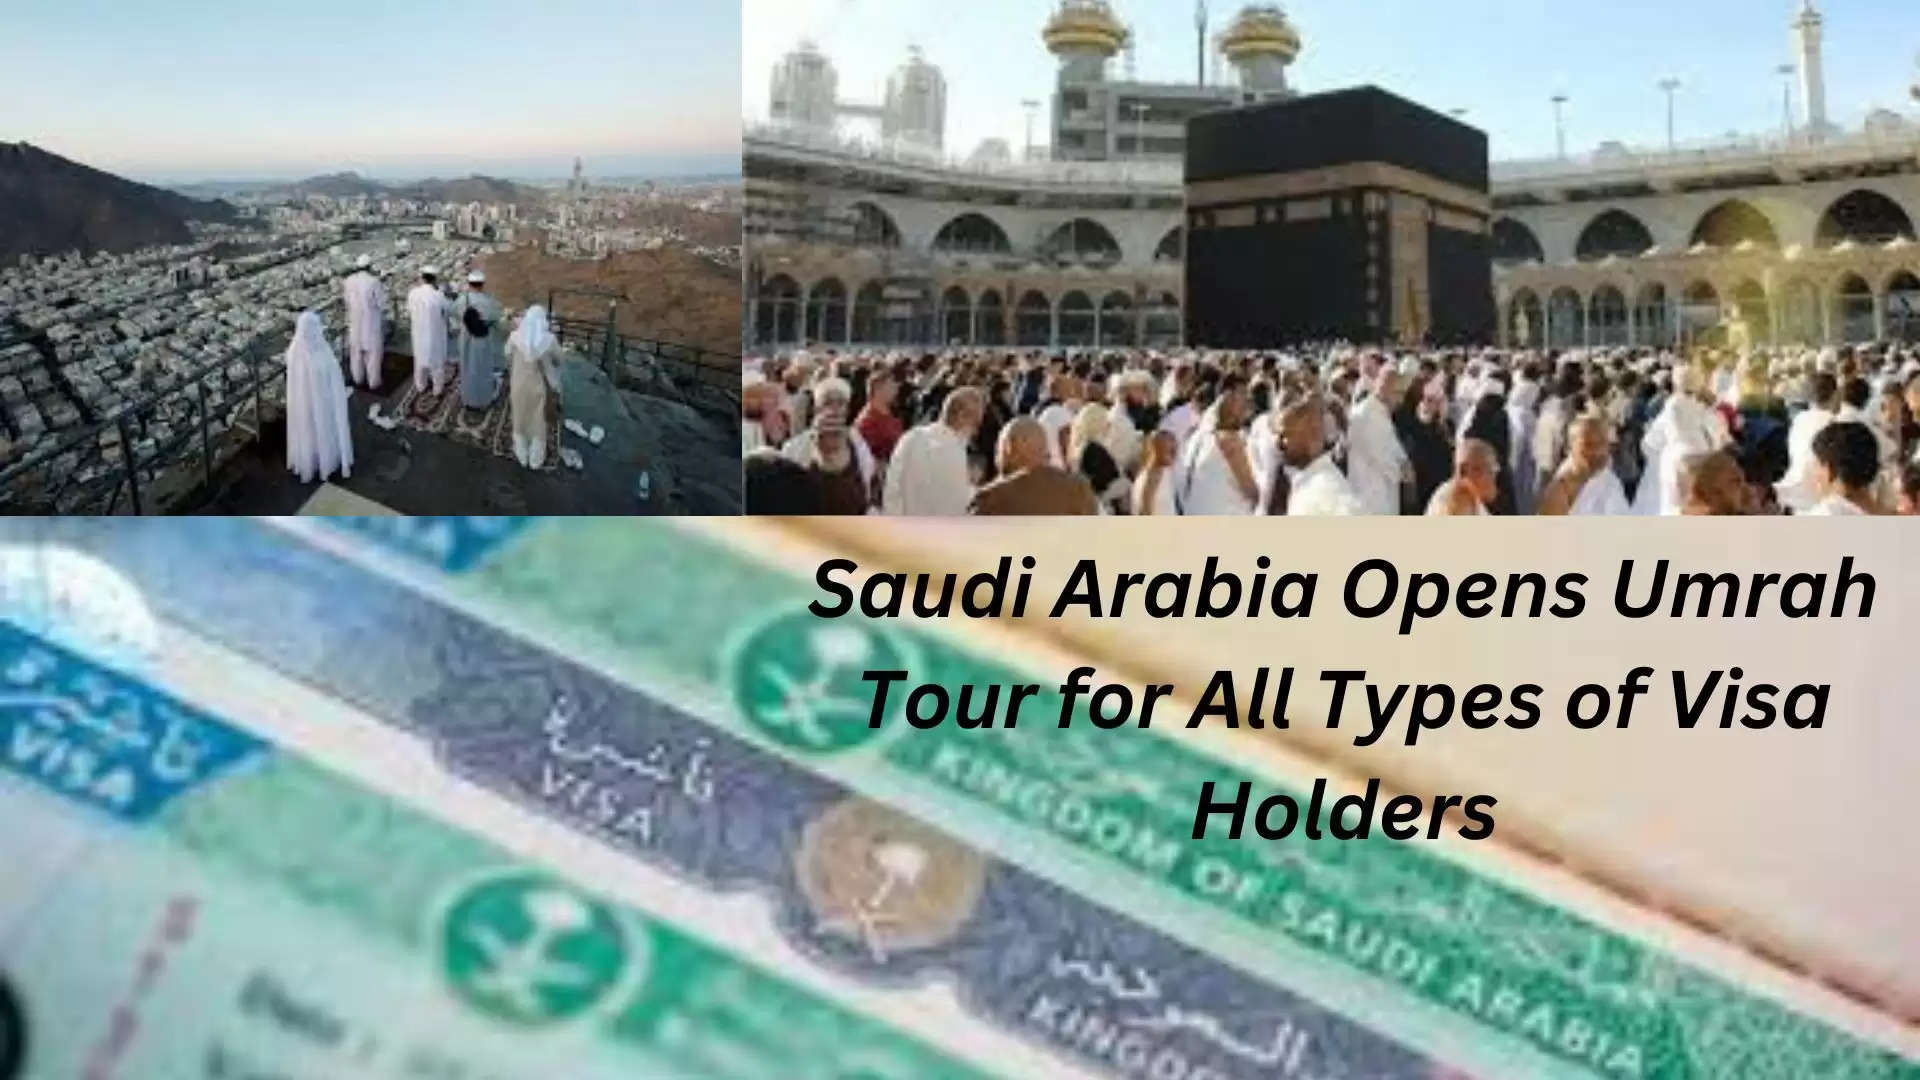 Saudi Opens Umrah Tour for all Types of Visa Holders